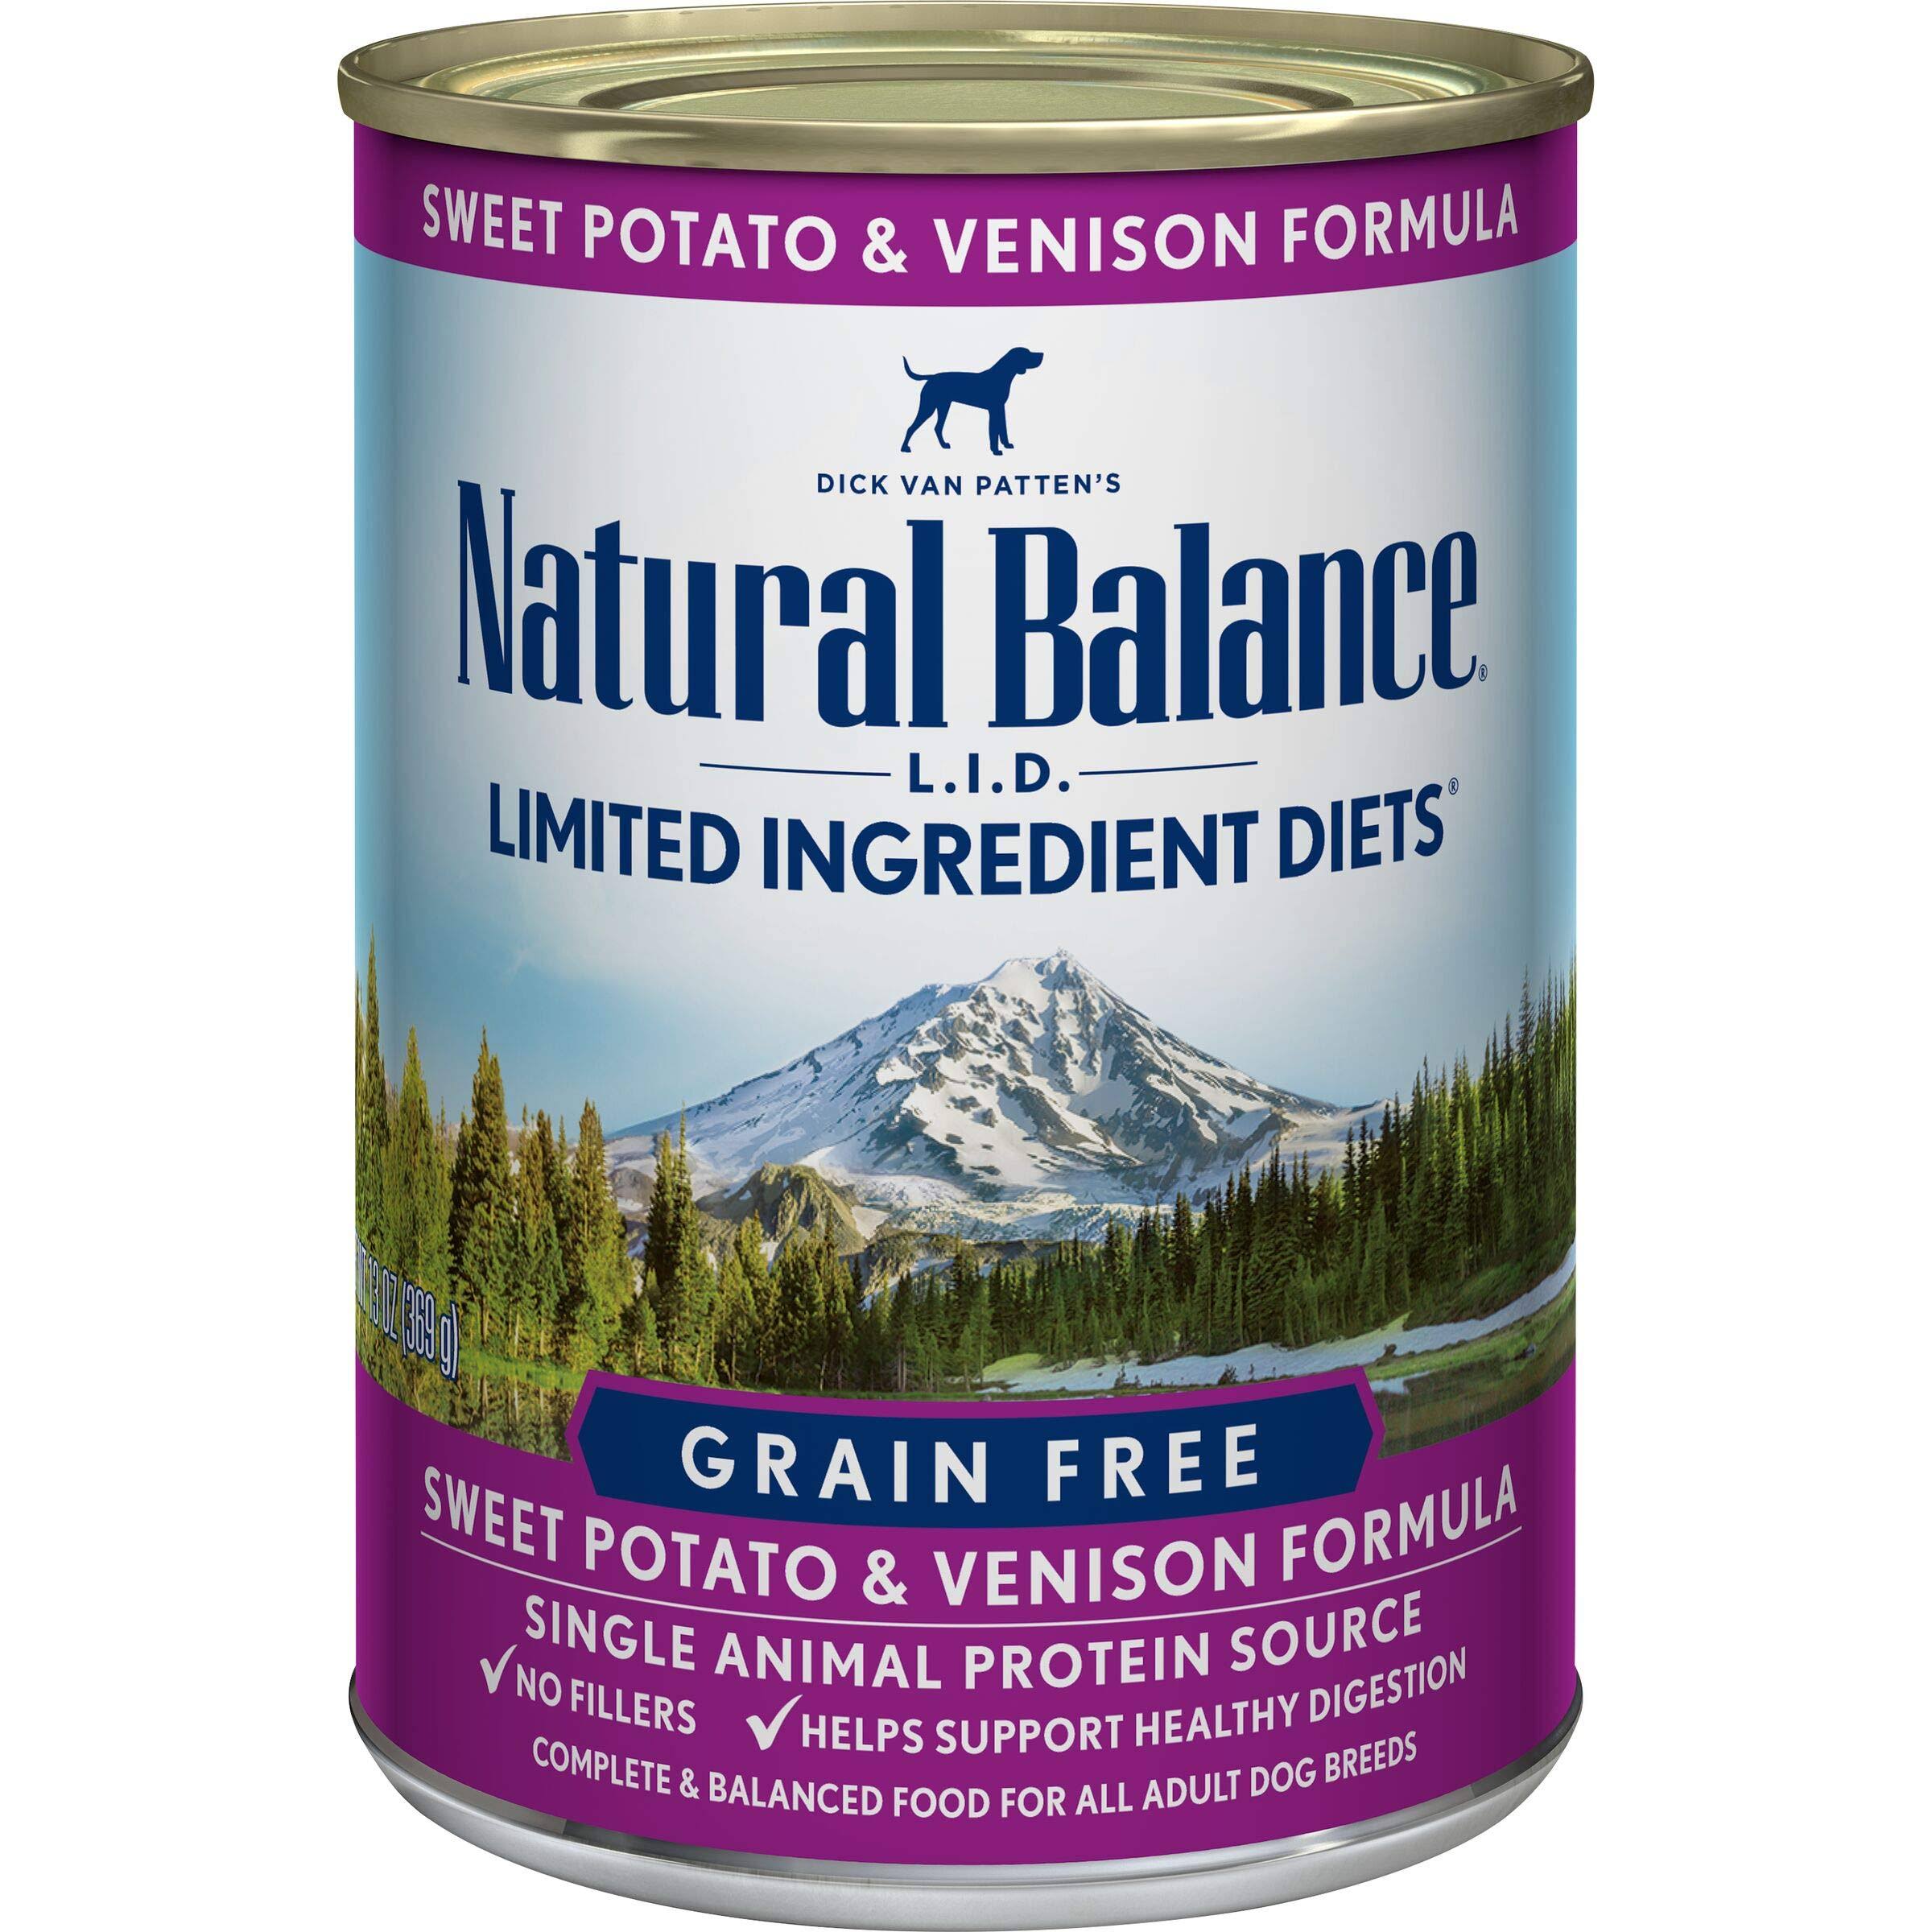 Natural Balance L.I.D. Limited Ingredient Diets Canned Dog Food, Sweet Potato & Venison Formula, 13-Ounce Cans (Pack of 12)